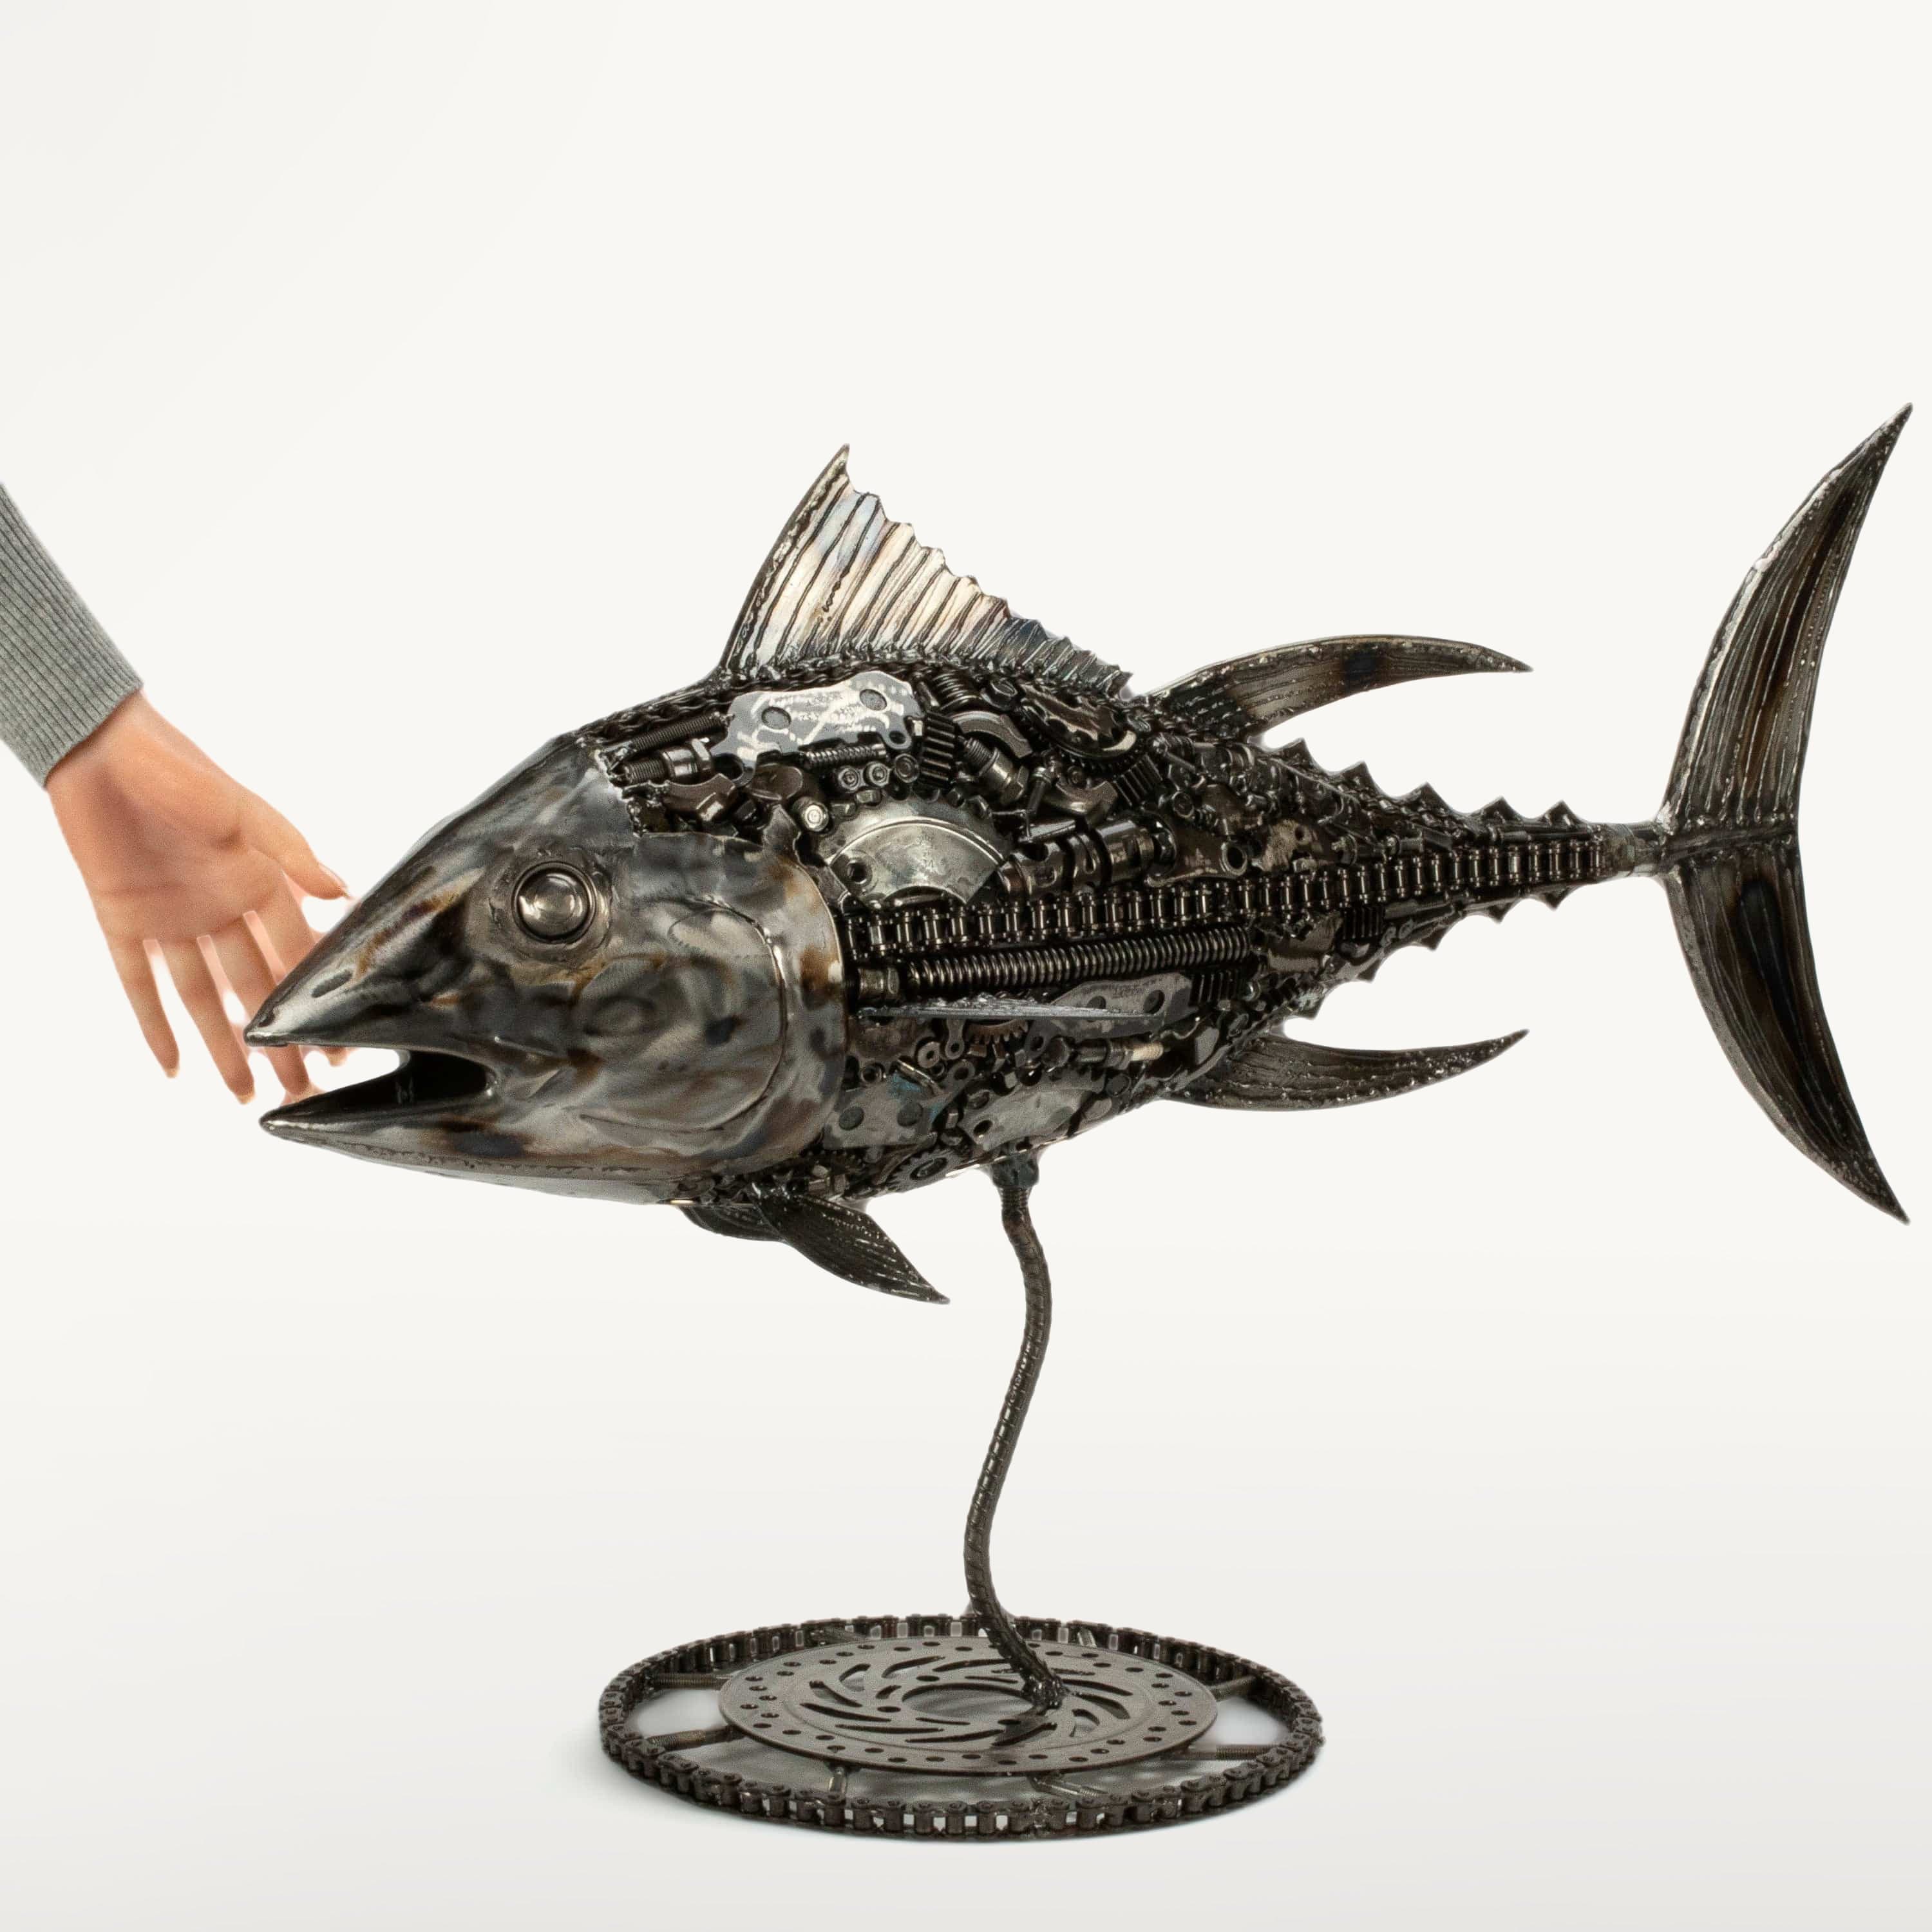 KALIFANO Recycled Metal Art 39" Tuna Fish Inspired Recycled Metal Art Sculpture RMS-T98x56-PK